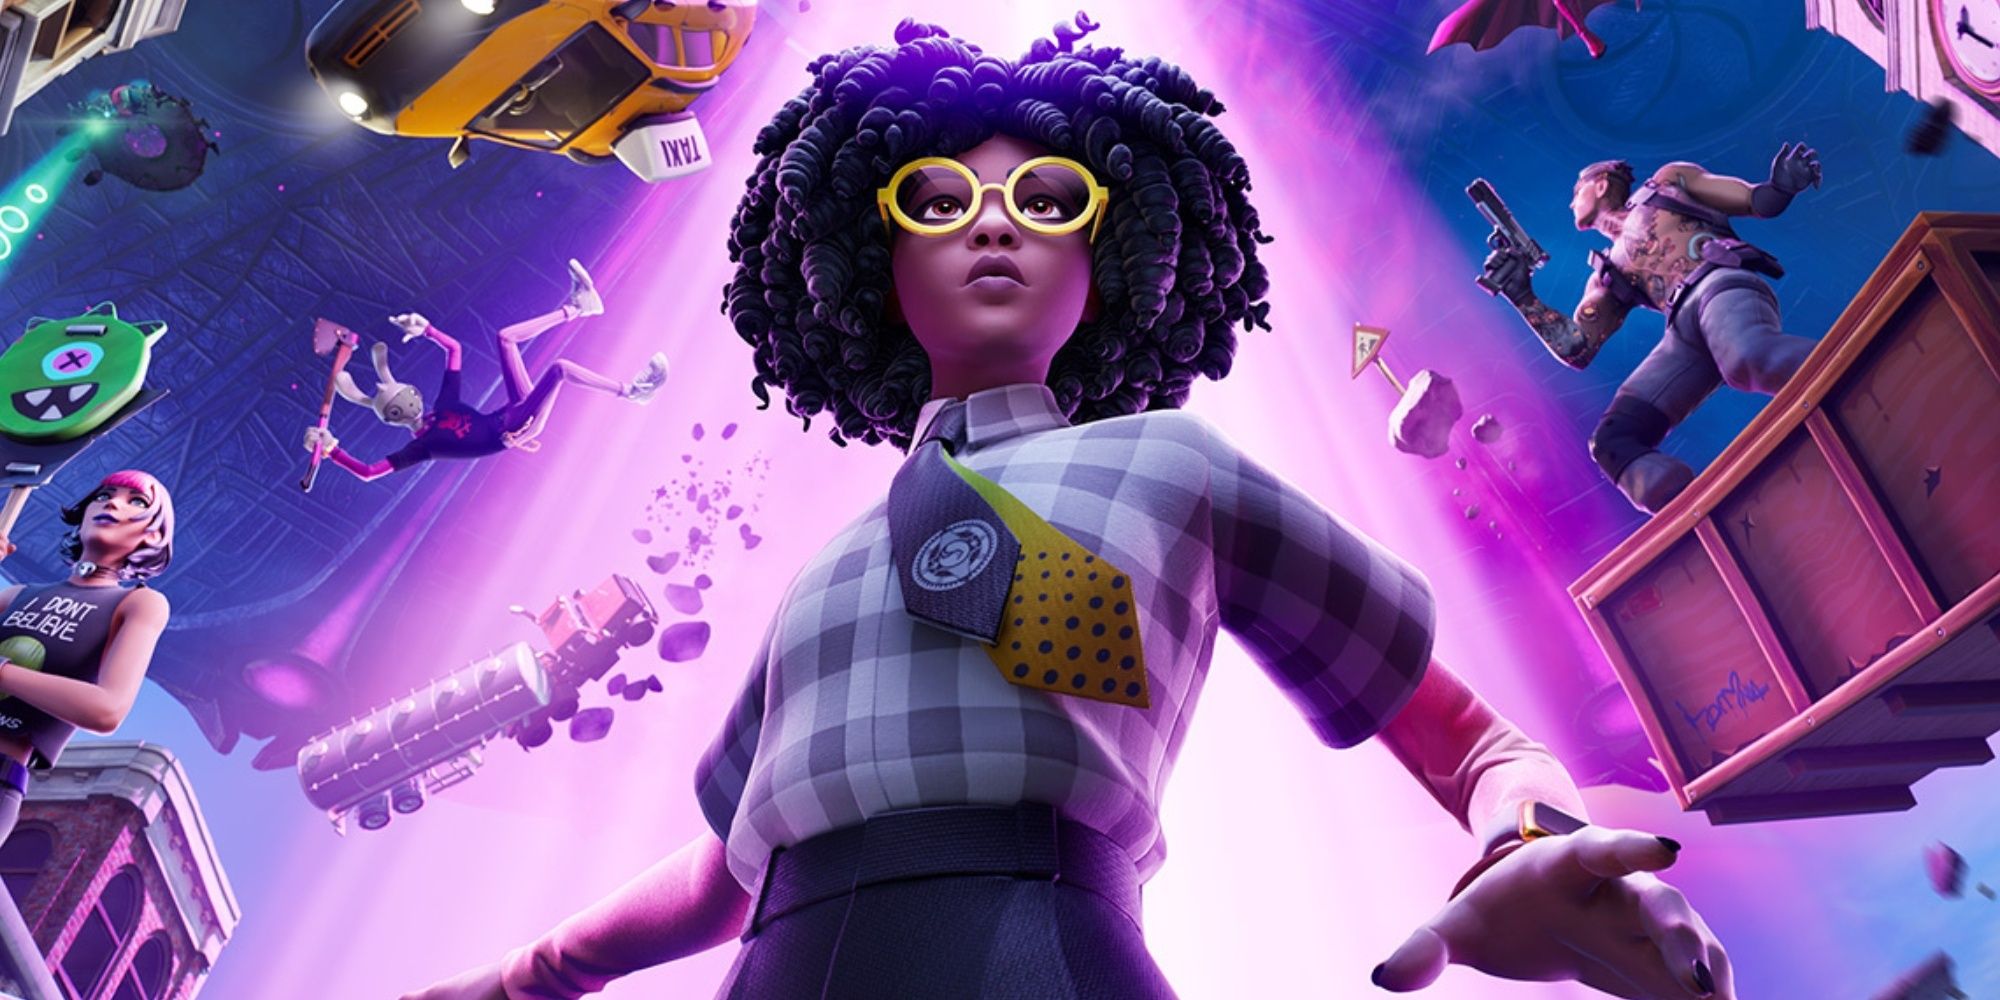 Agent Sloane surrounded by floating vehicles and characters in Fortnite